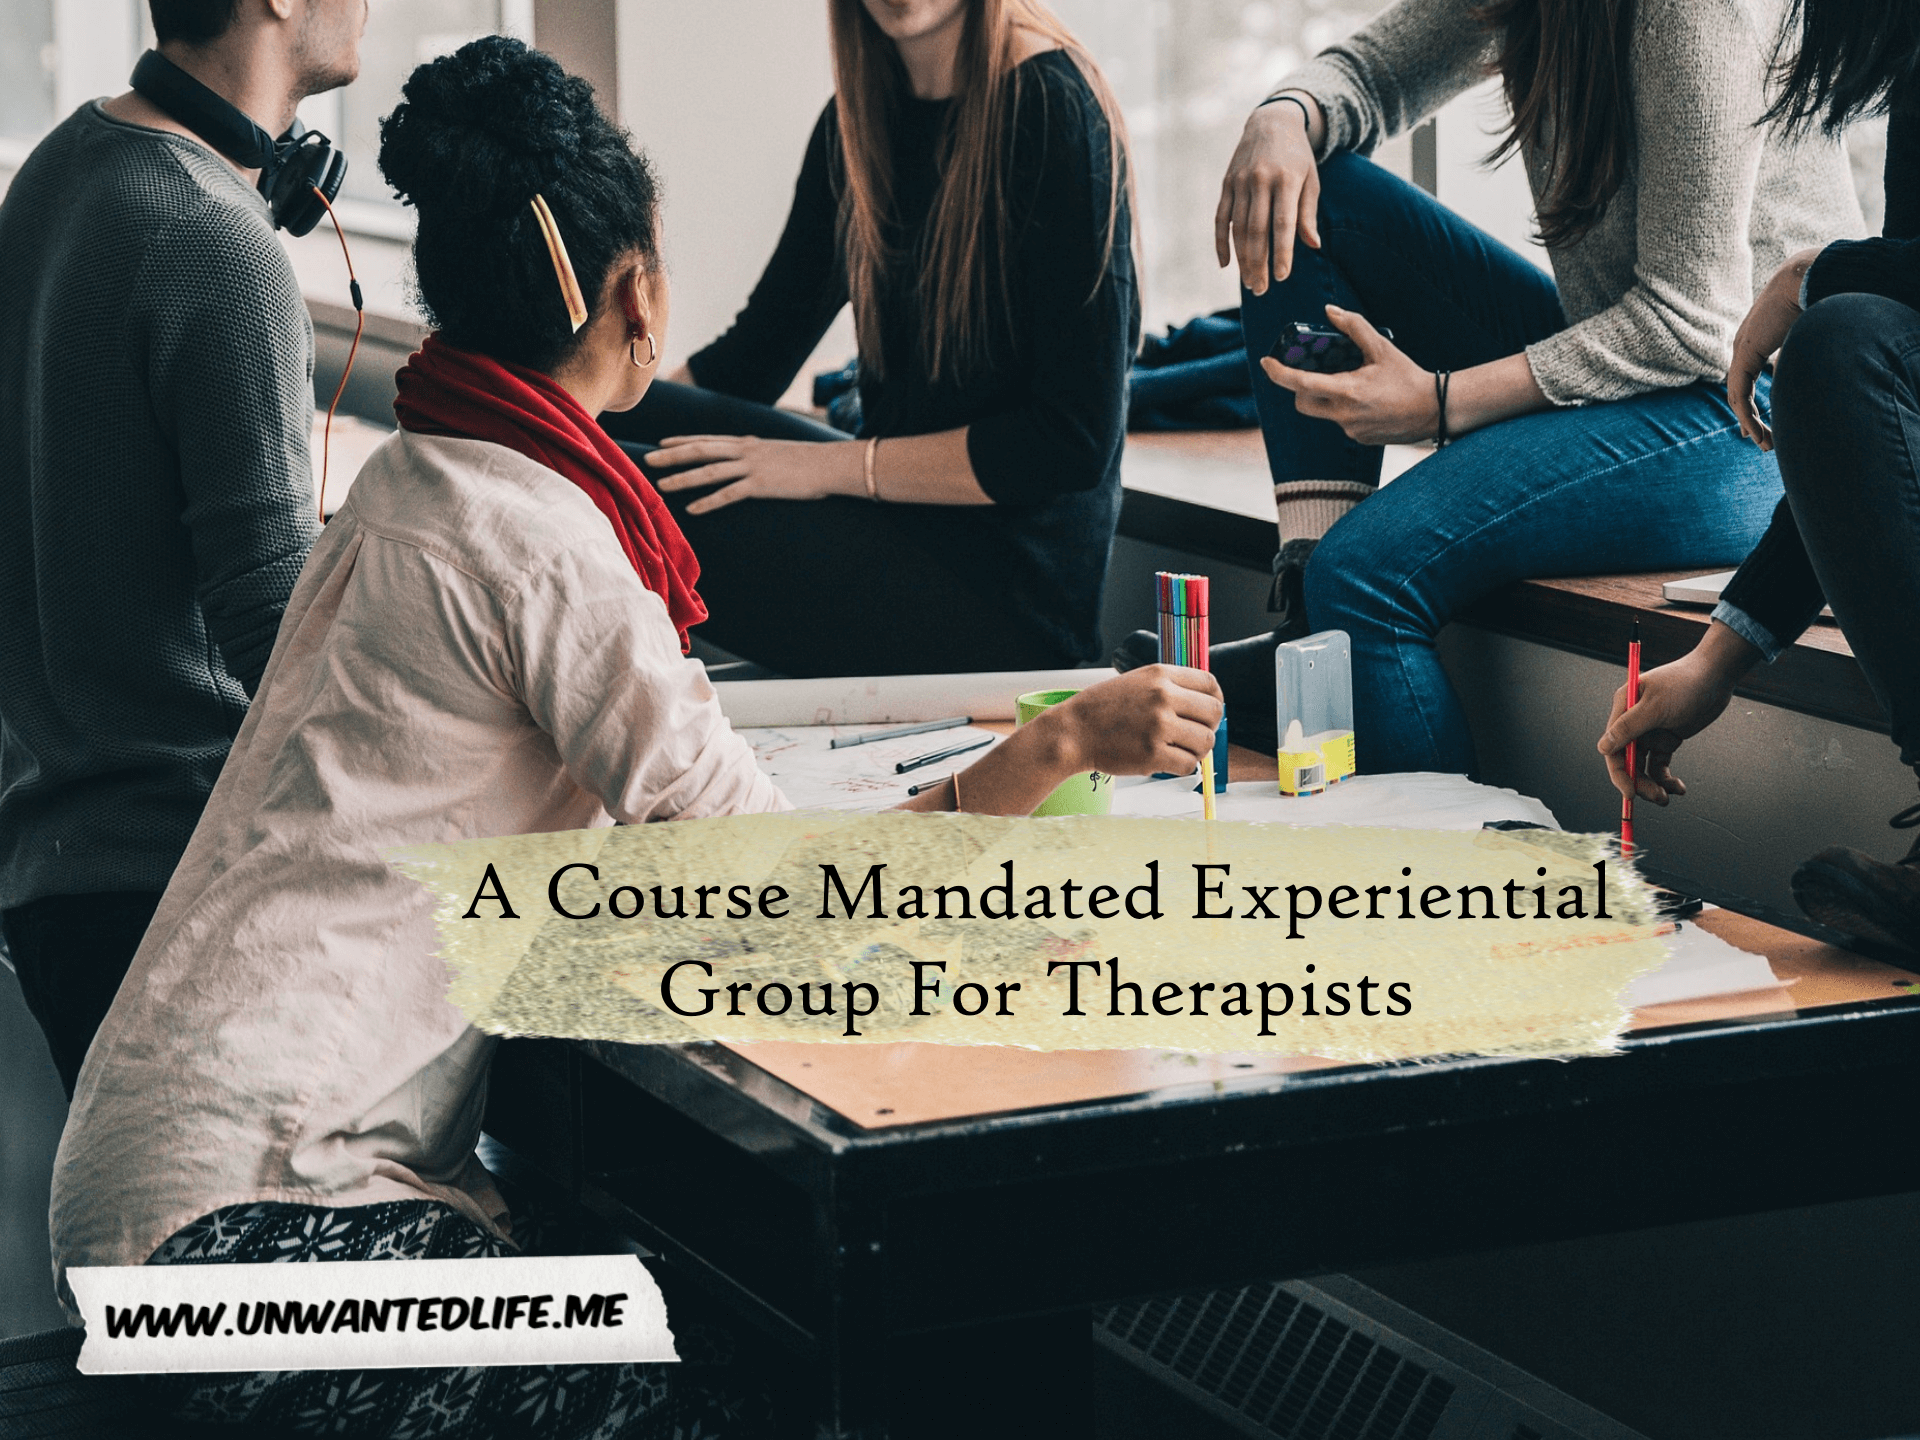 A group of people sitting around a table talking represent the topic of the article - A Course Mandated Experiential Group For Therapists